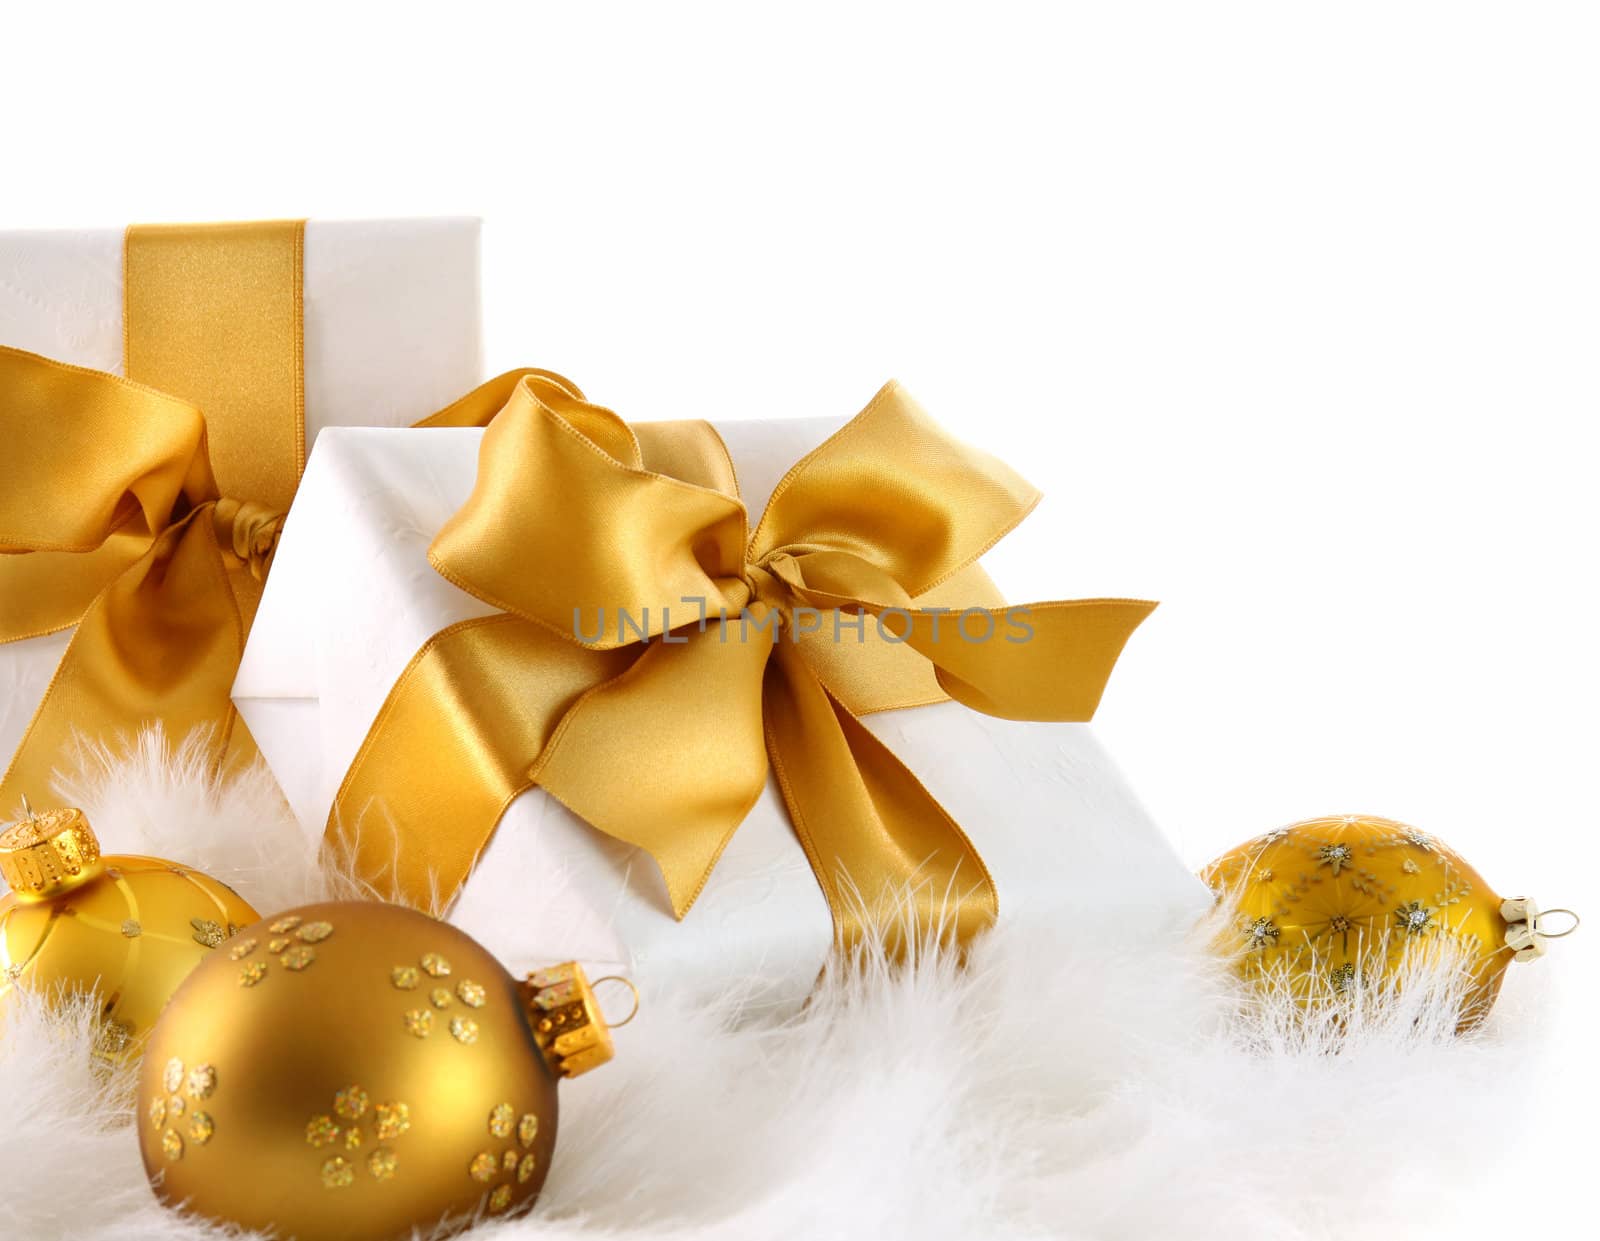 Gold ribbon gifts with christmas balls by Sandralise